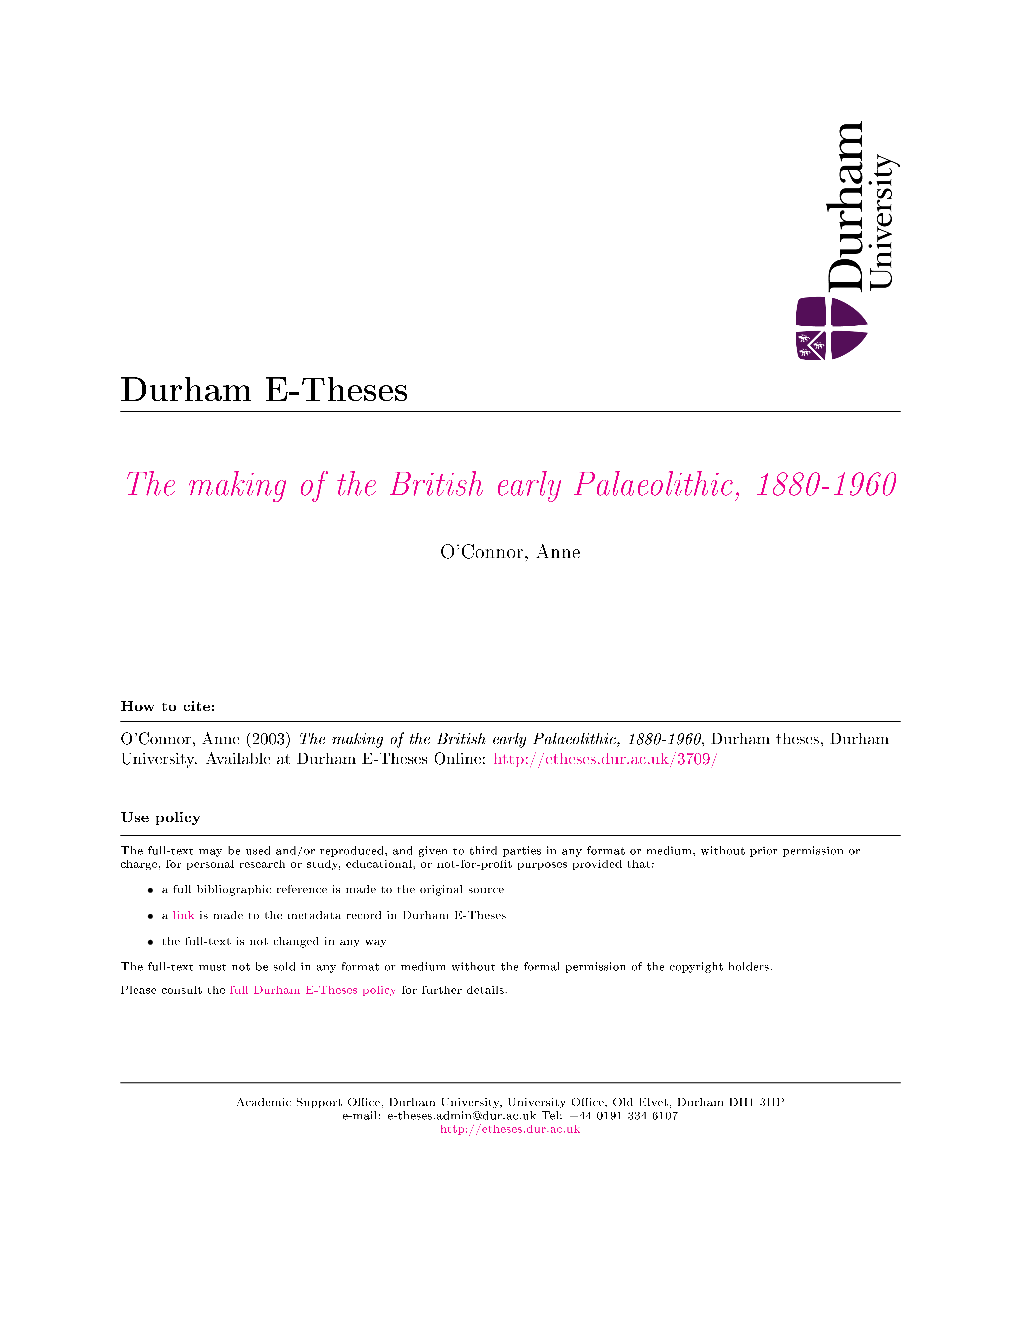 The Making of the British Early Palaeolithic, 1880-1960